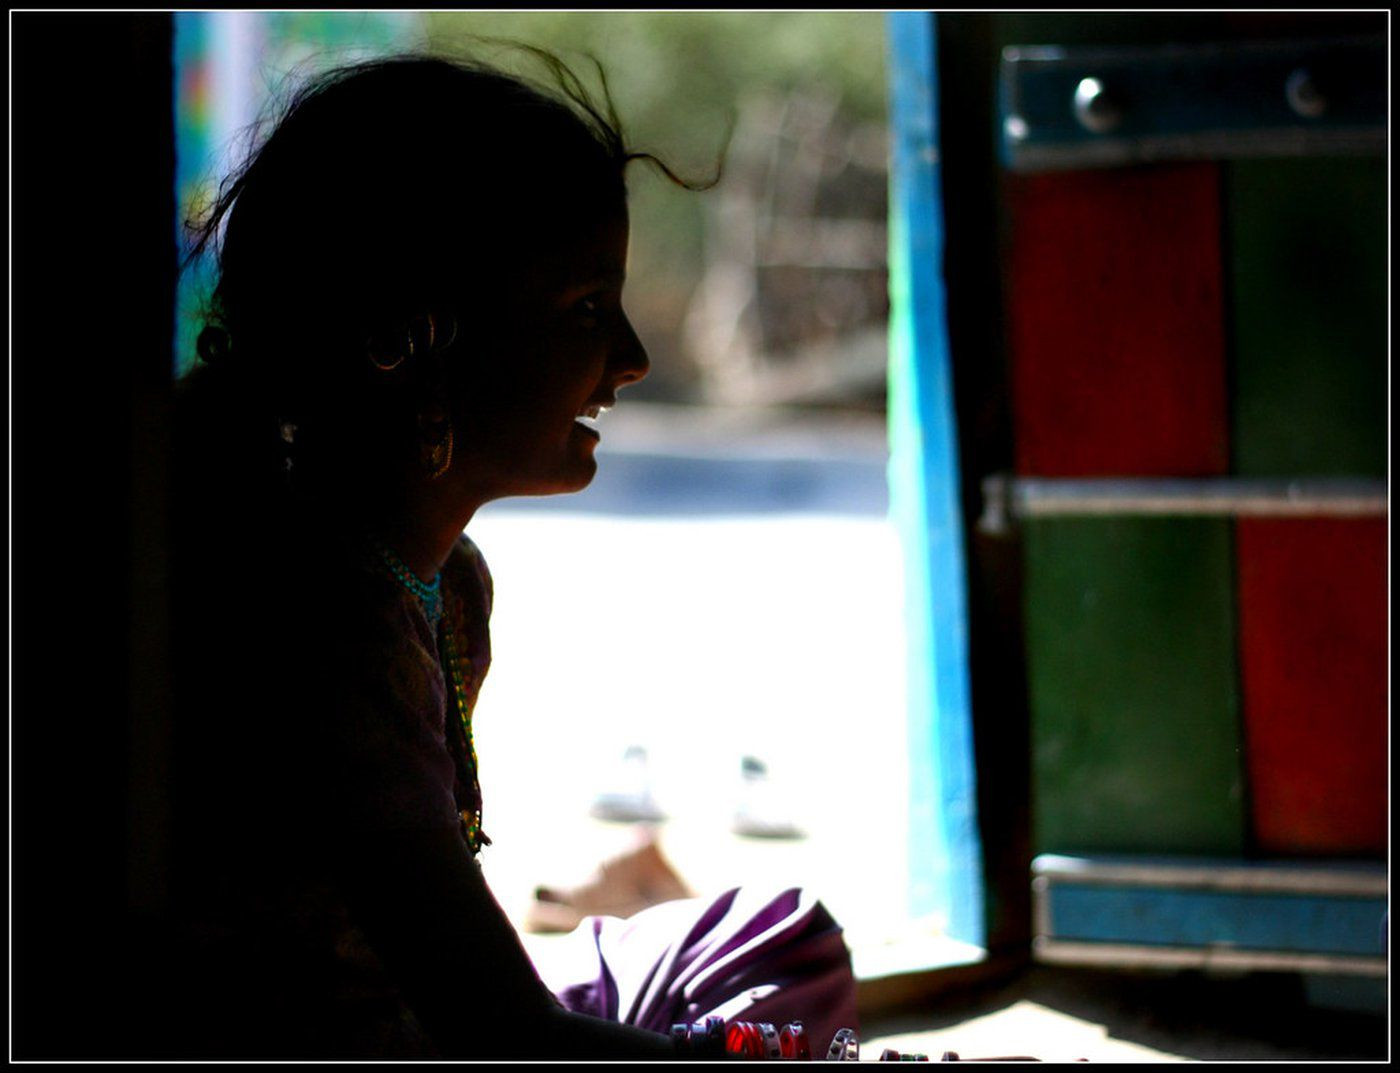 Vulnerable girls in India received none of the benefits of their citizenship rights and so they do not fear losing those rights. (Abhisek Sarda, Flickr (https://bit.ly/3HwtuzW)